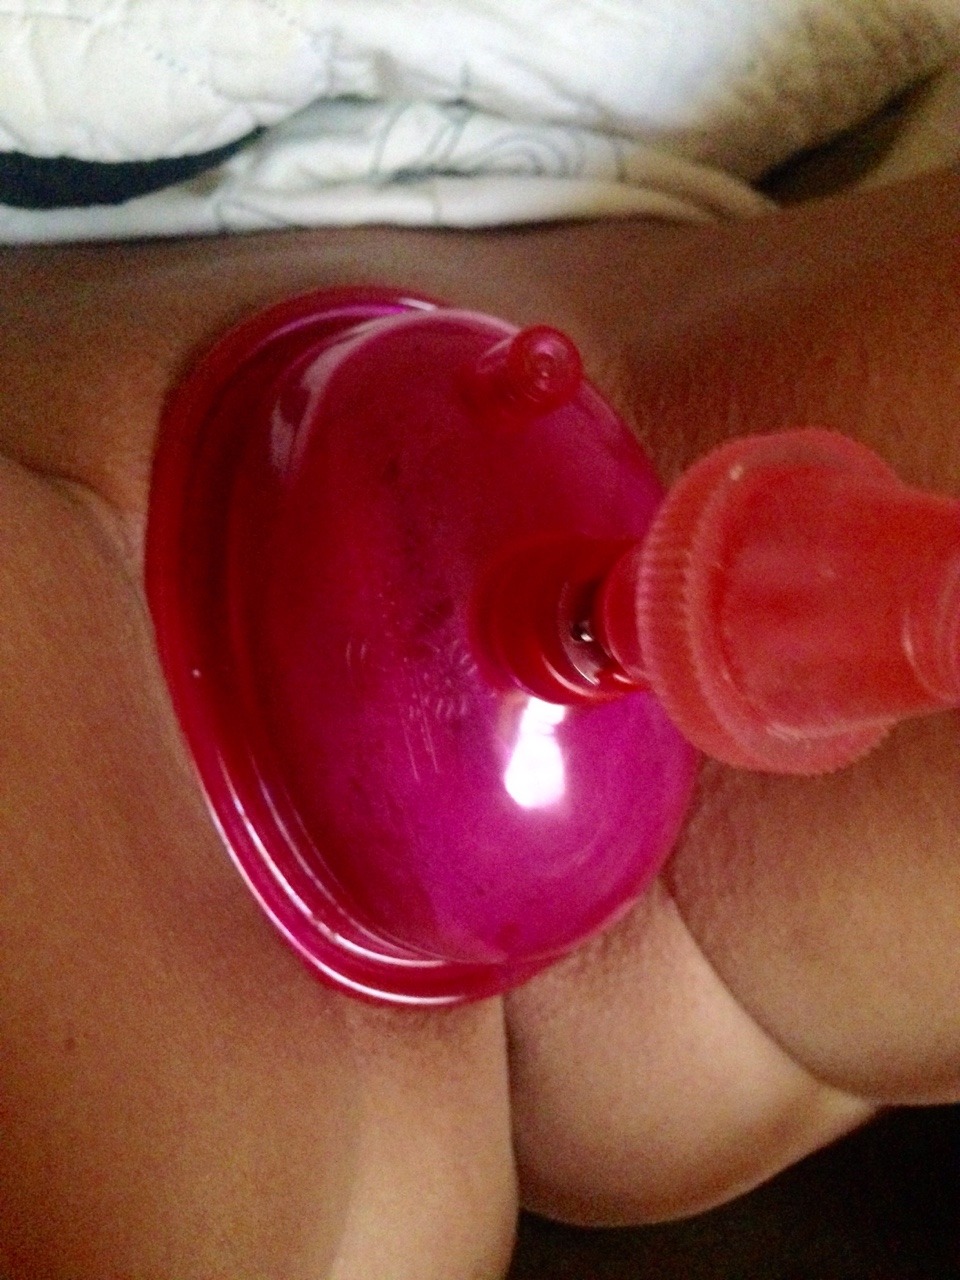 ashley-valentina:  One of my Cucks bought me a pussy pump! OMFG! This is my favorite